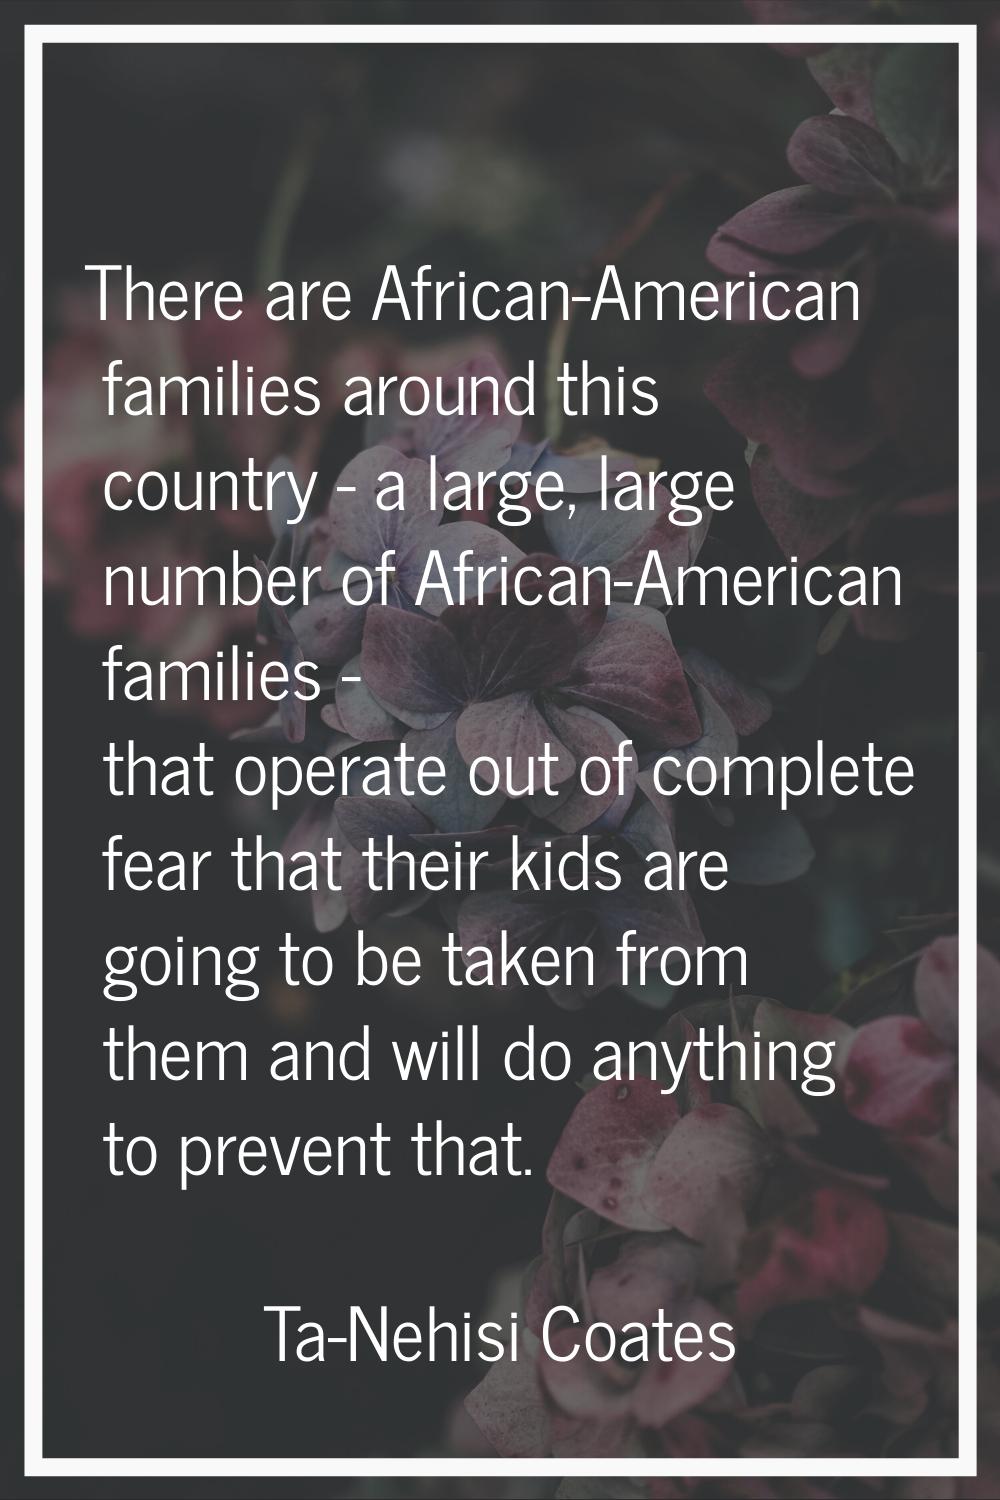 There are African-American families around this country - a large, large number of African-American